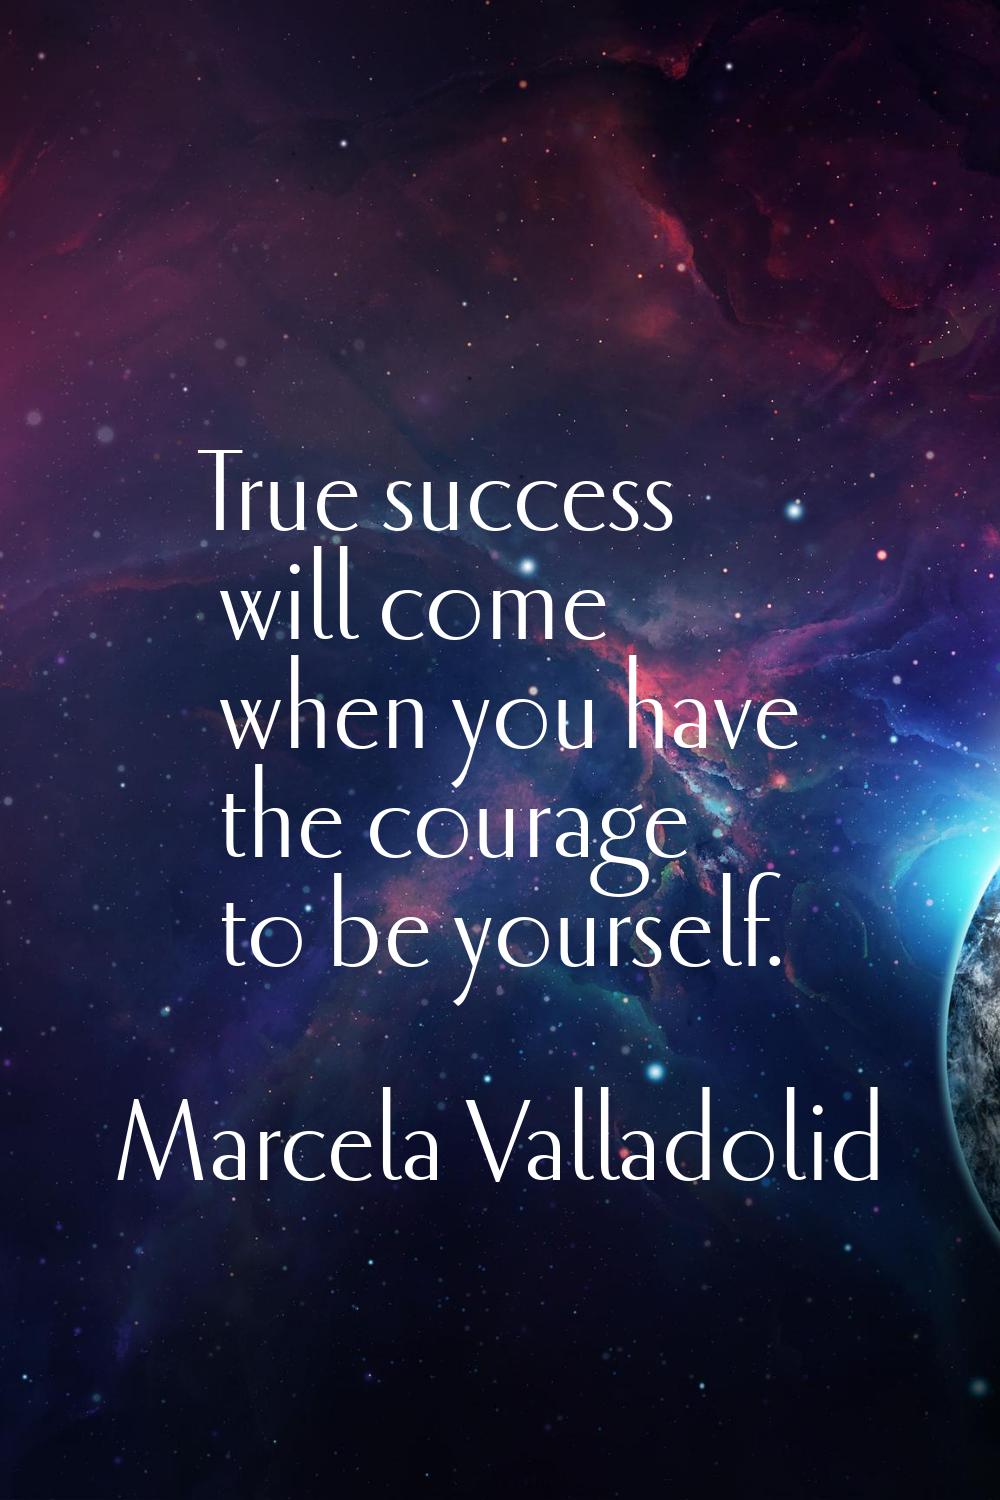 True success will come when you have the courage to be yourself.